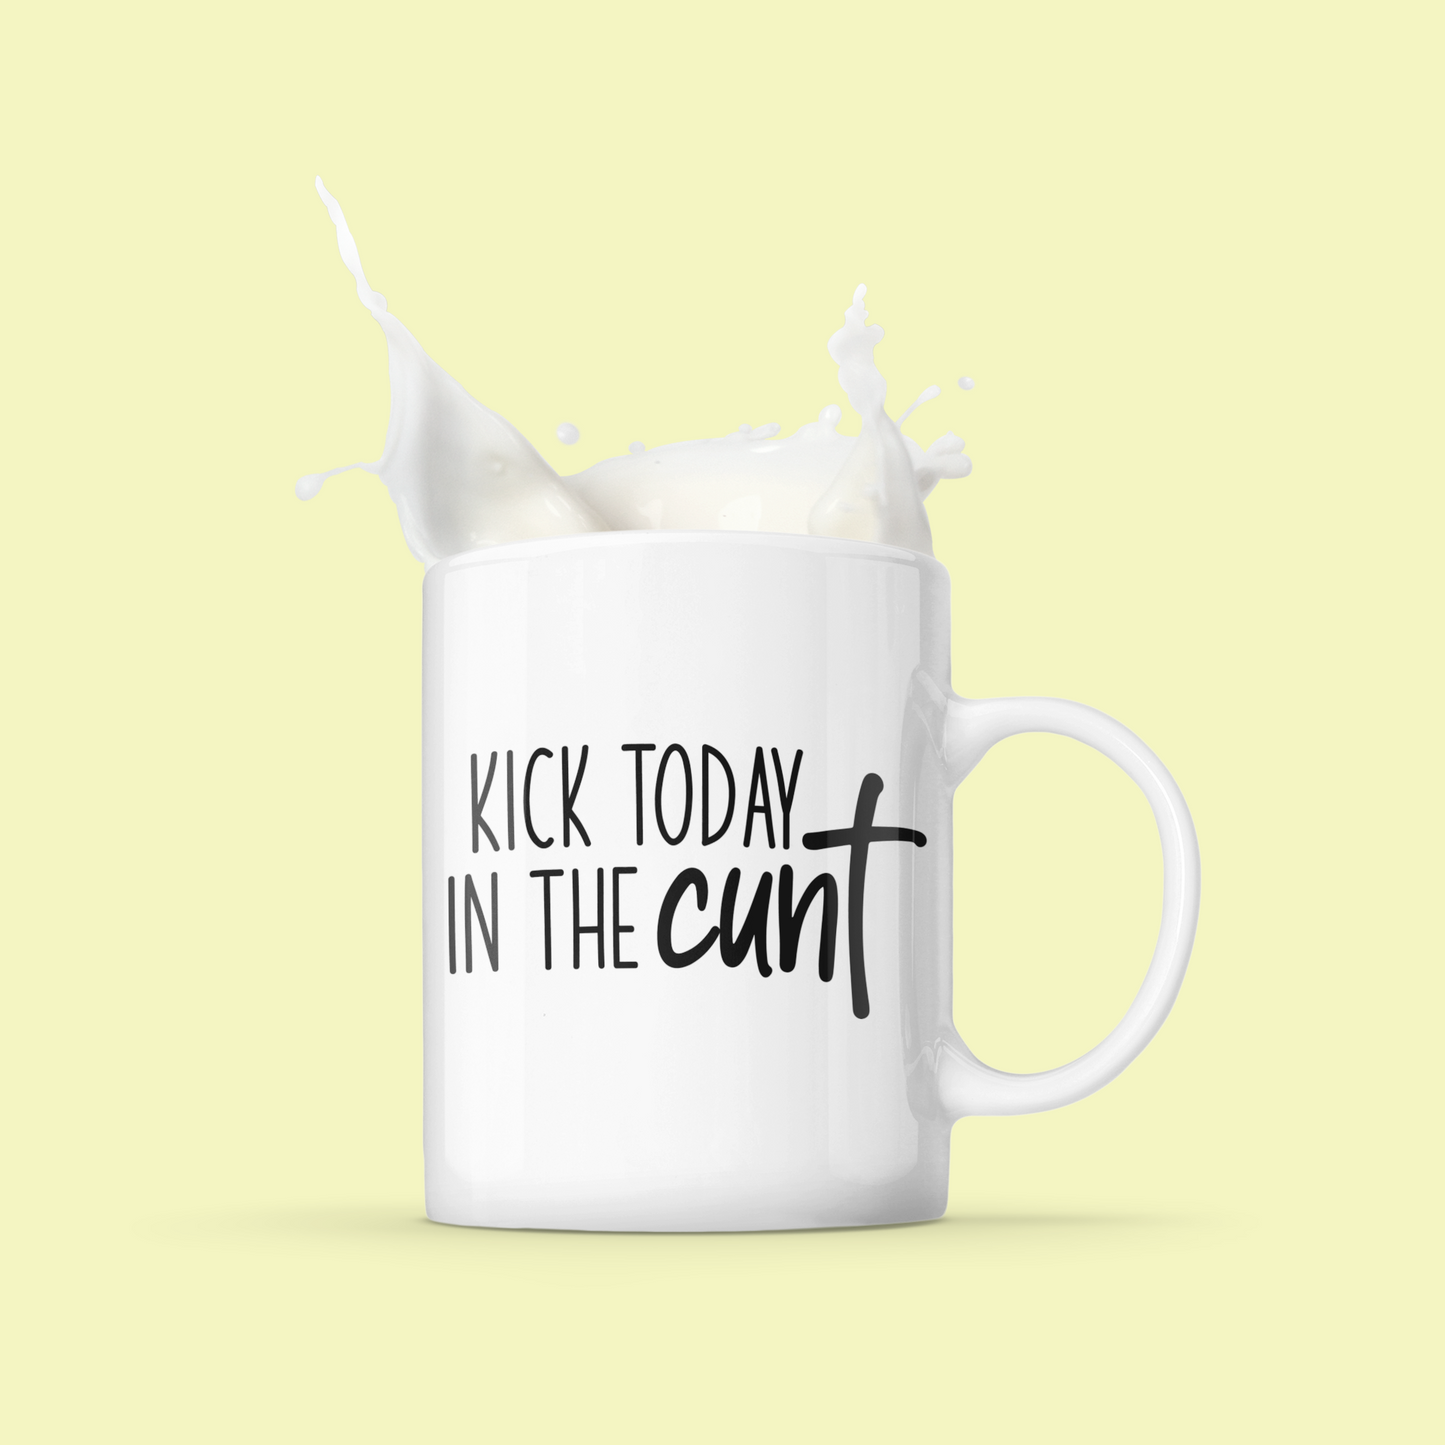 KICK TODAY IN THE CUNT MUG